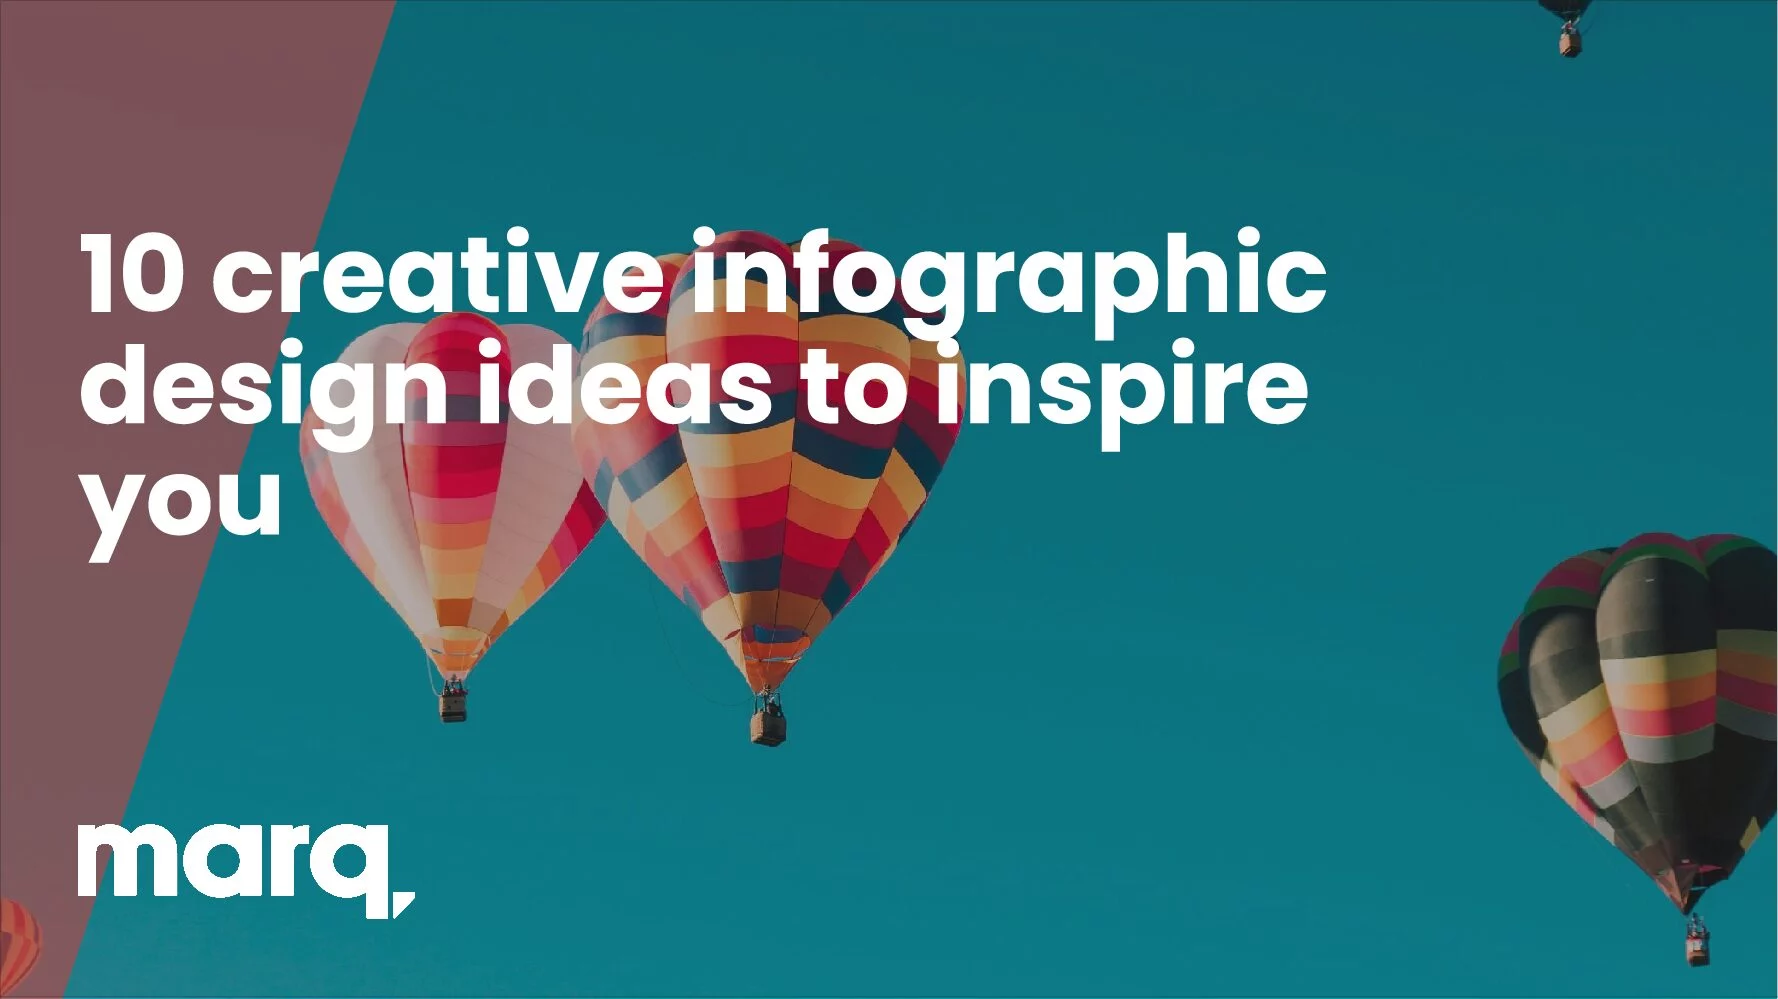 10 creative infographic design ideas to inspire you